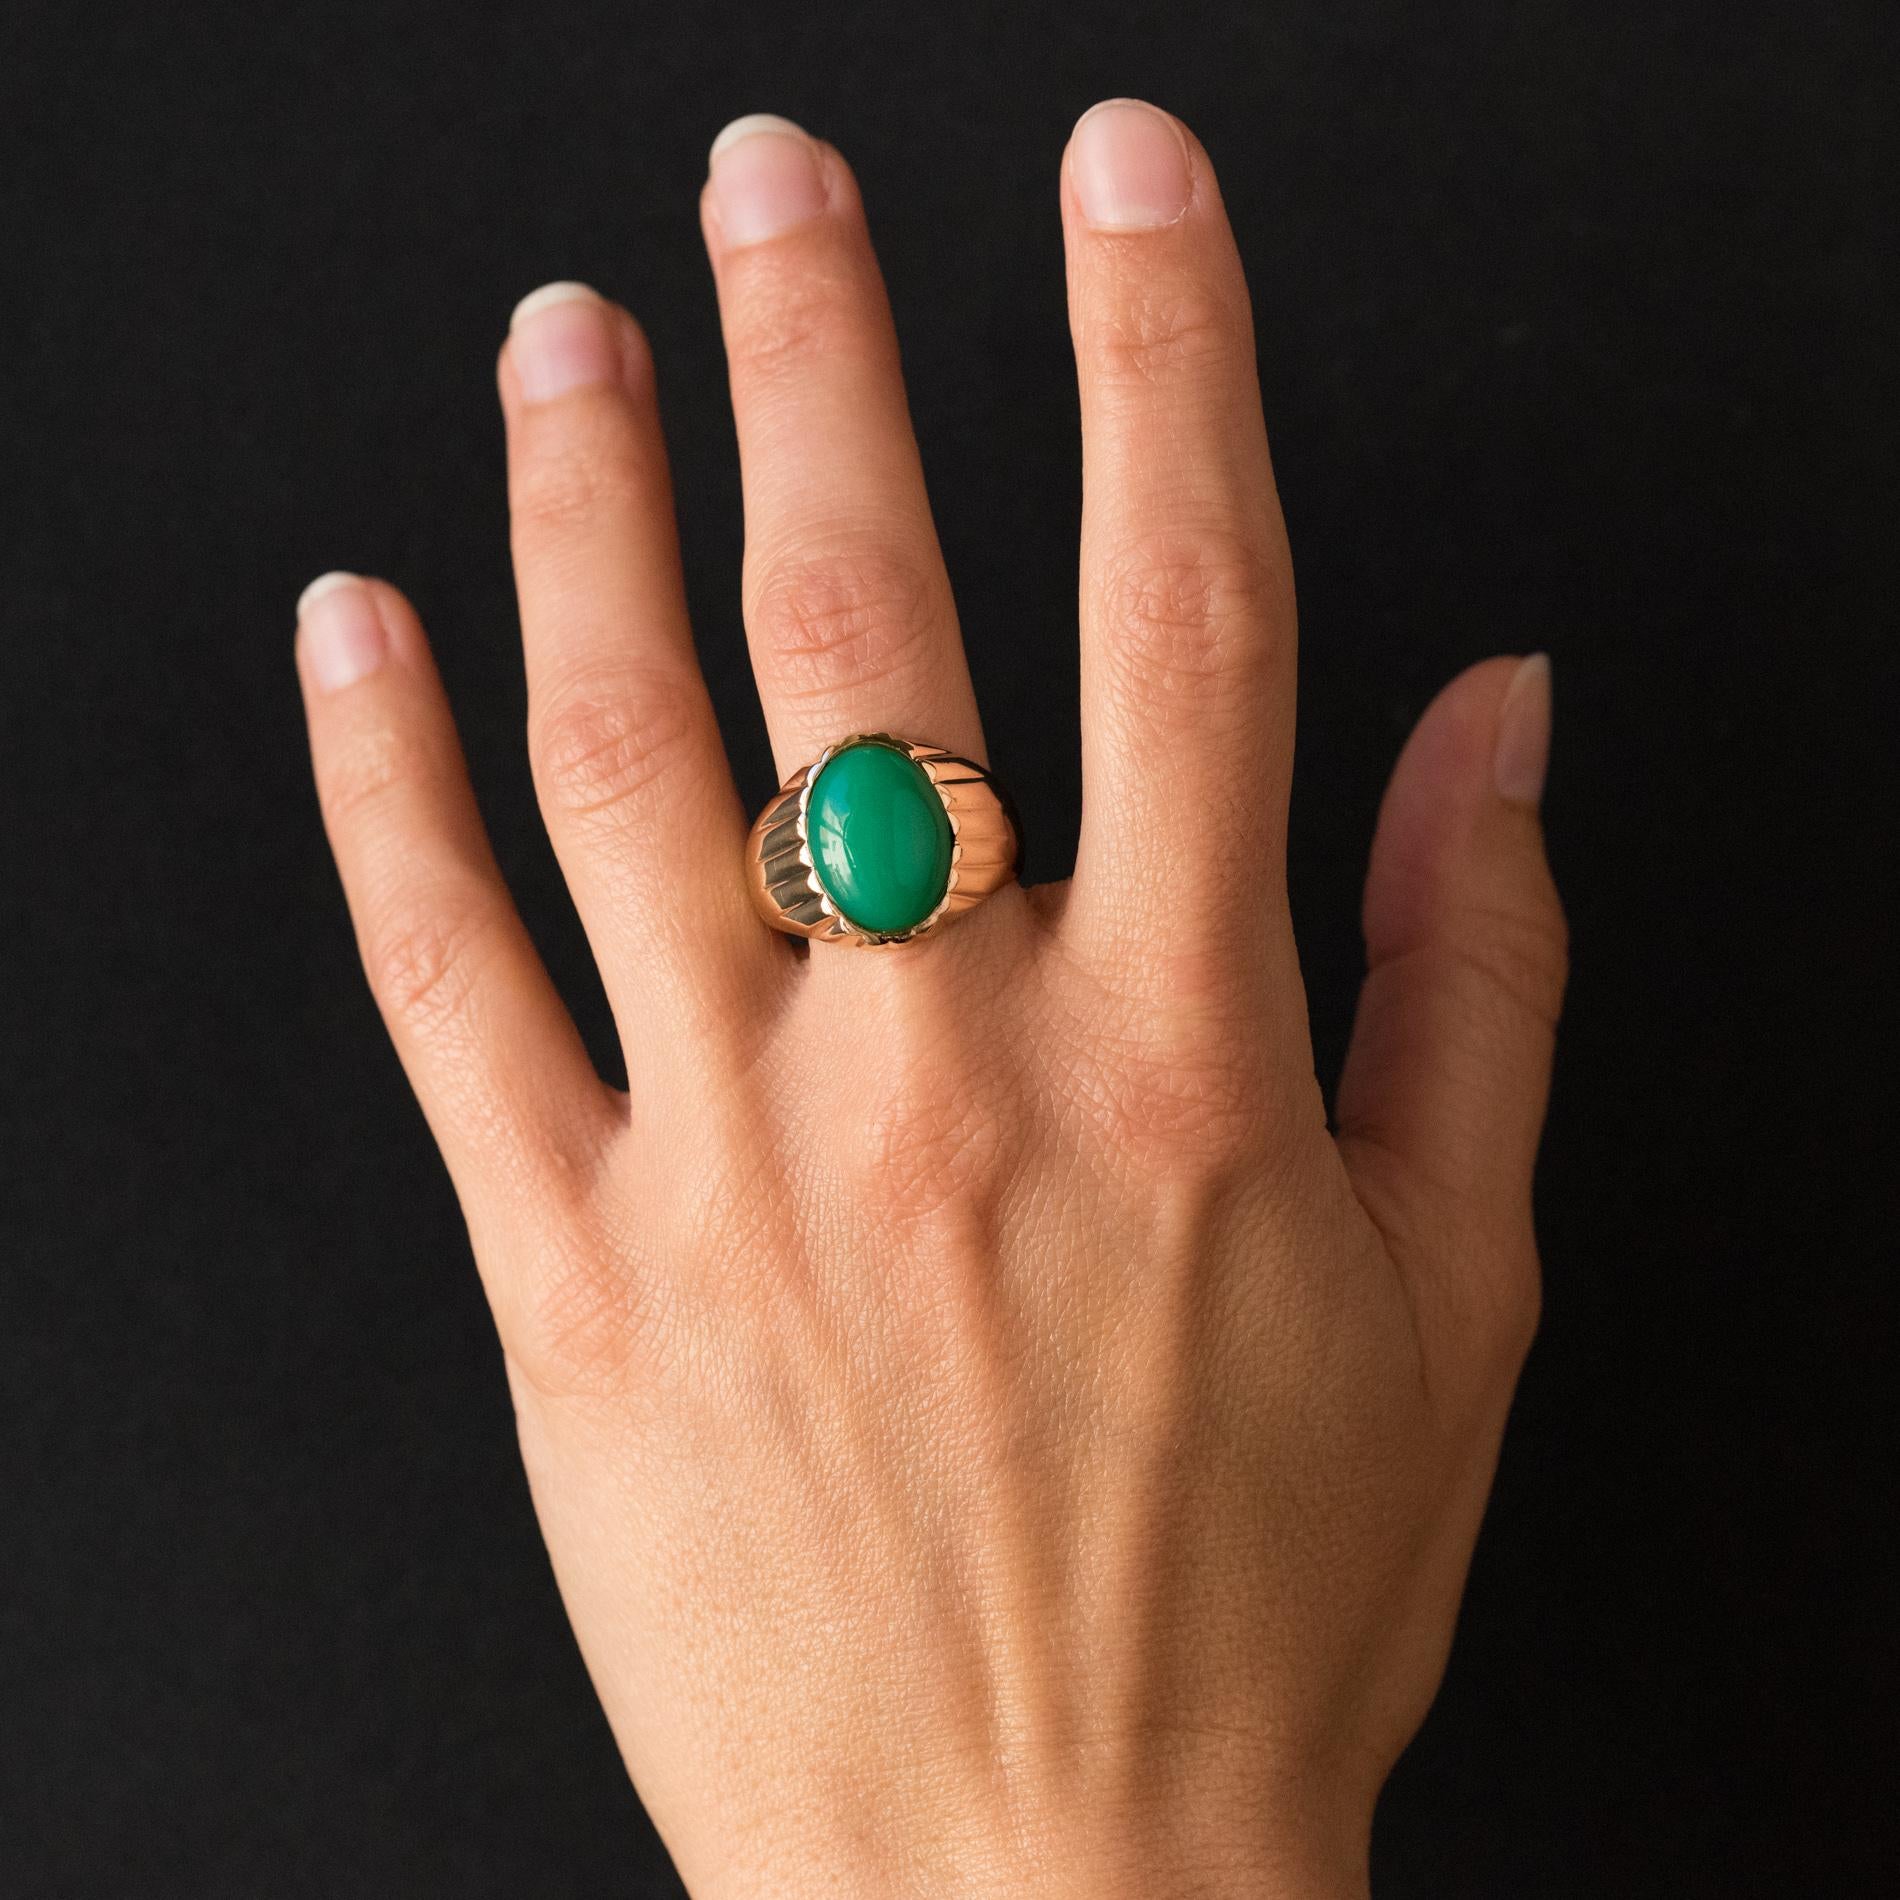 Ring in 18 karat yellow gold.
In the form of a signet ring, this retro ring is decorated with an oval chrysoprase, surrounded by gadroons.
Total weight of chrysoprase: about 6 carats.
Height: 18.5 mm, width: 11.9 mm, thickness: about 5.2 mm, width